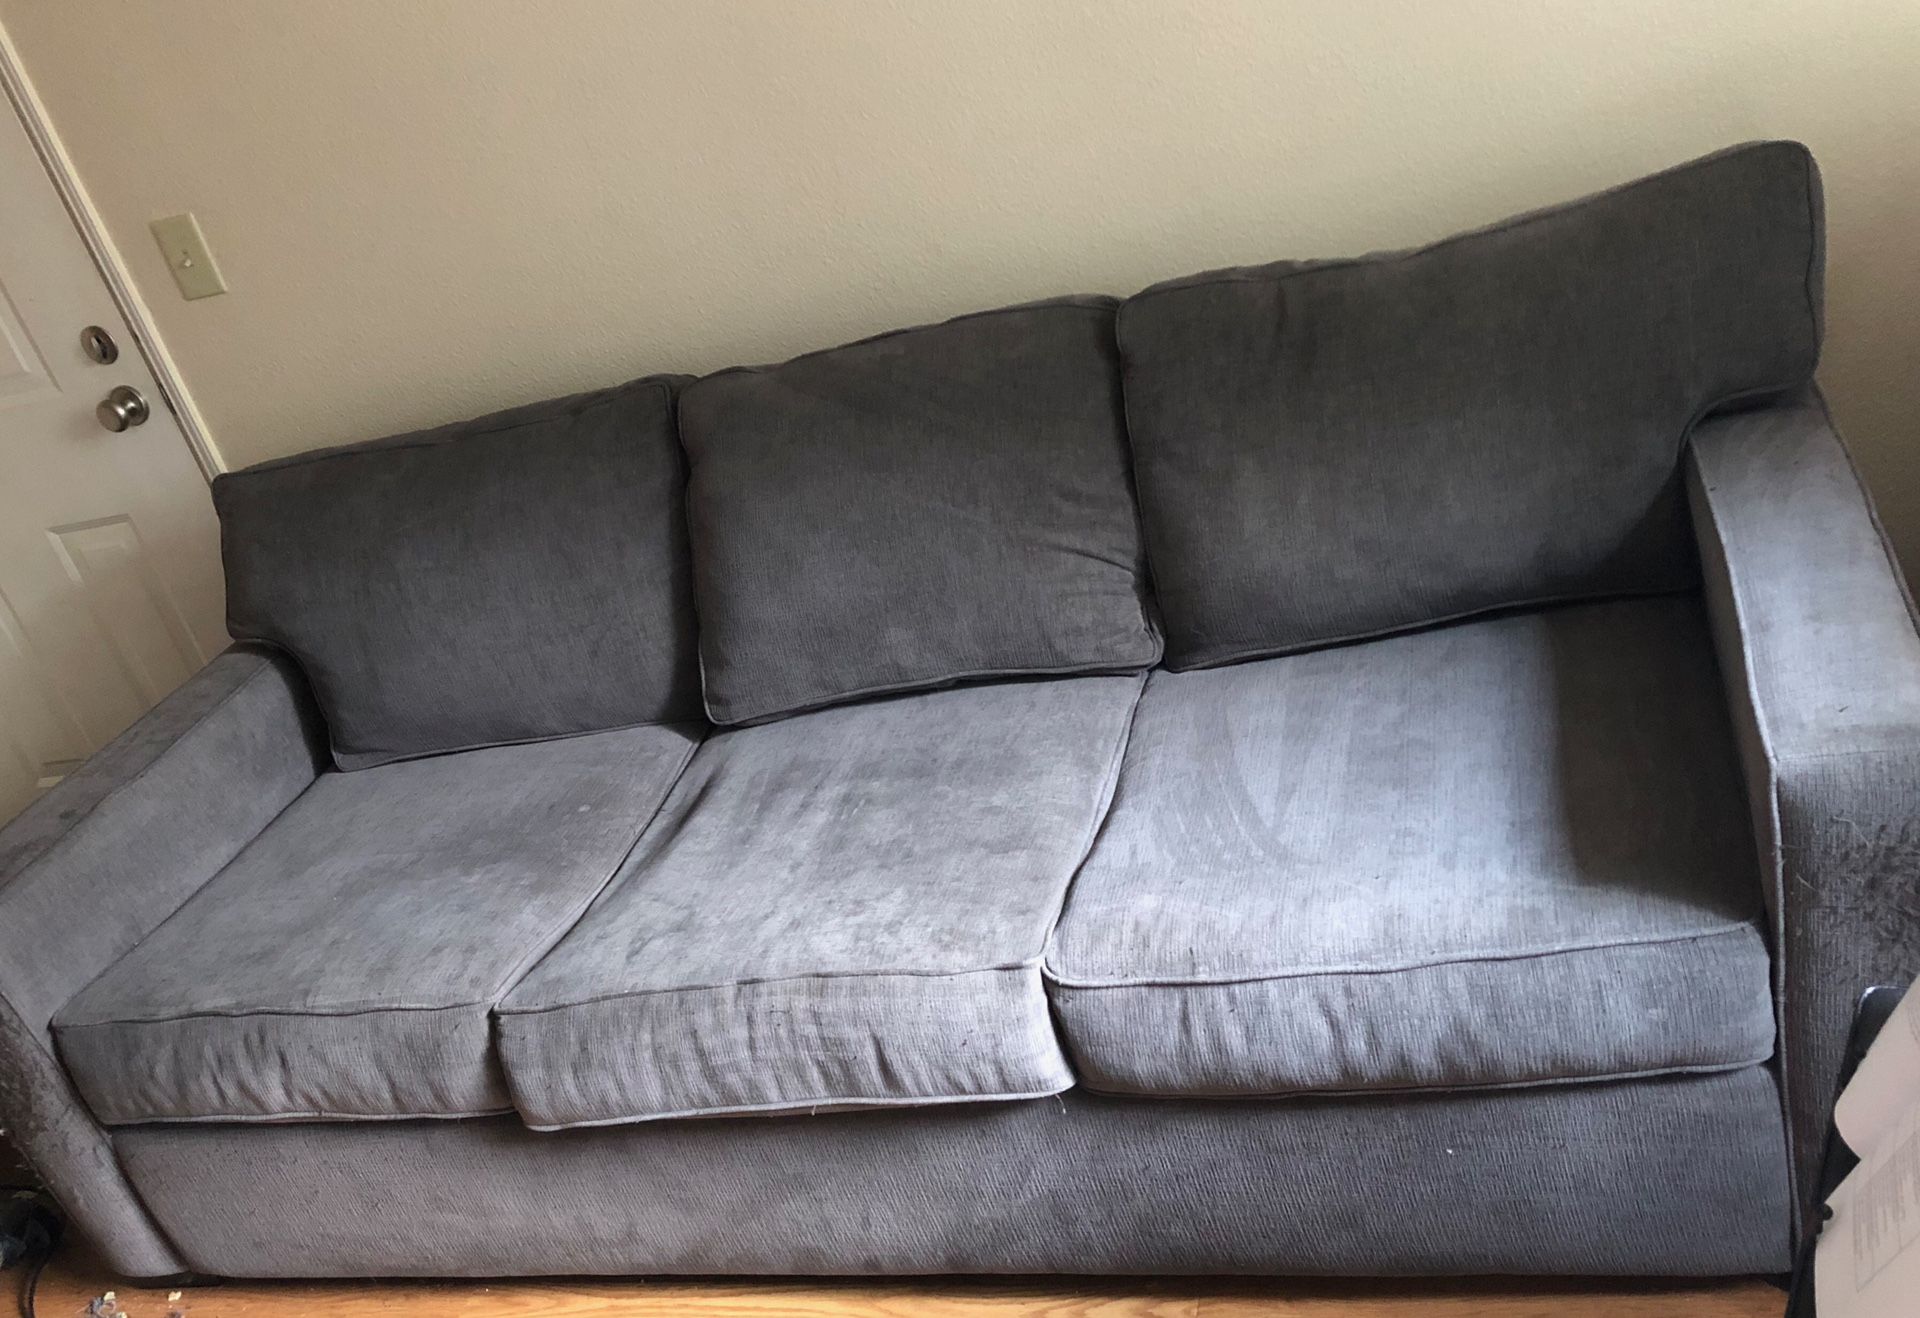 Free Couch! (some upholstery damage)